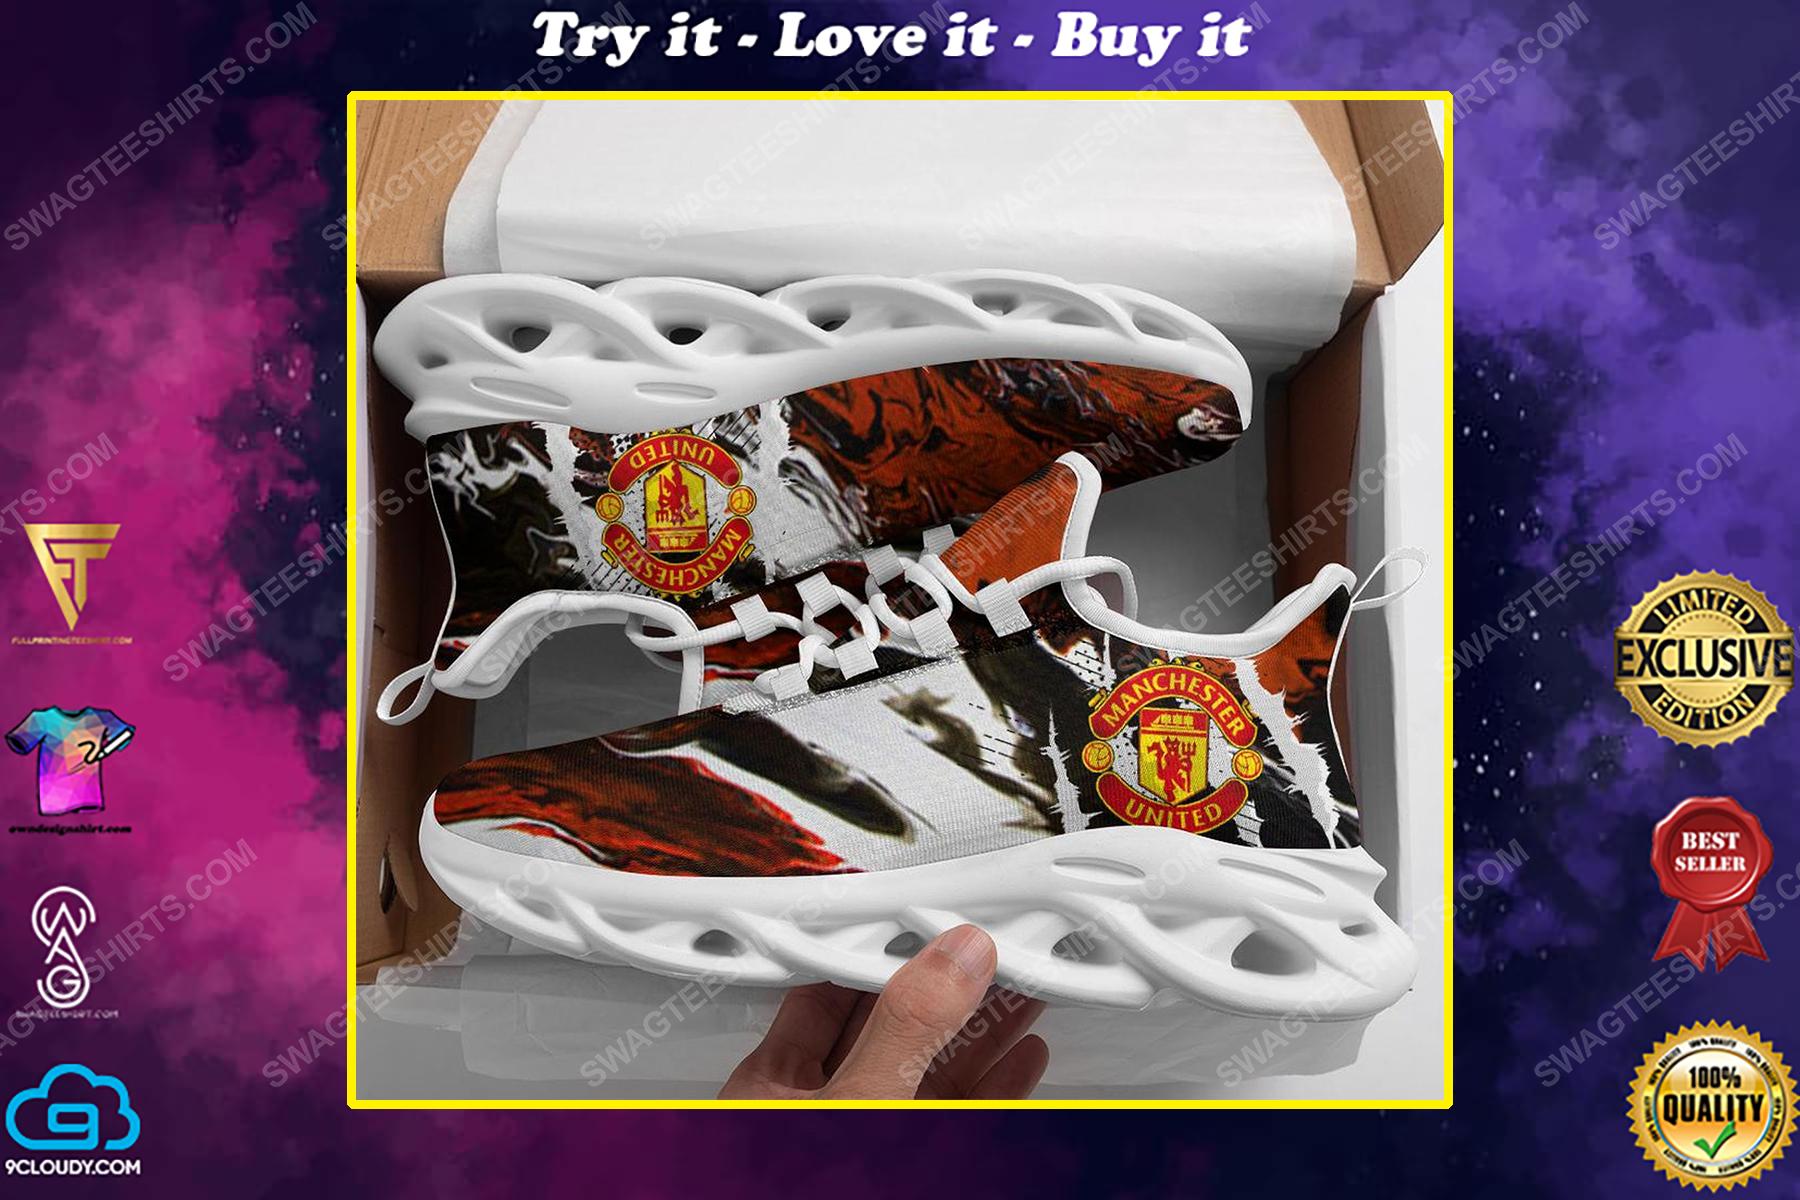 The manchester united football club max soul shoes